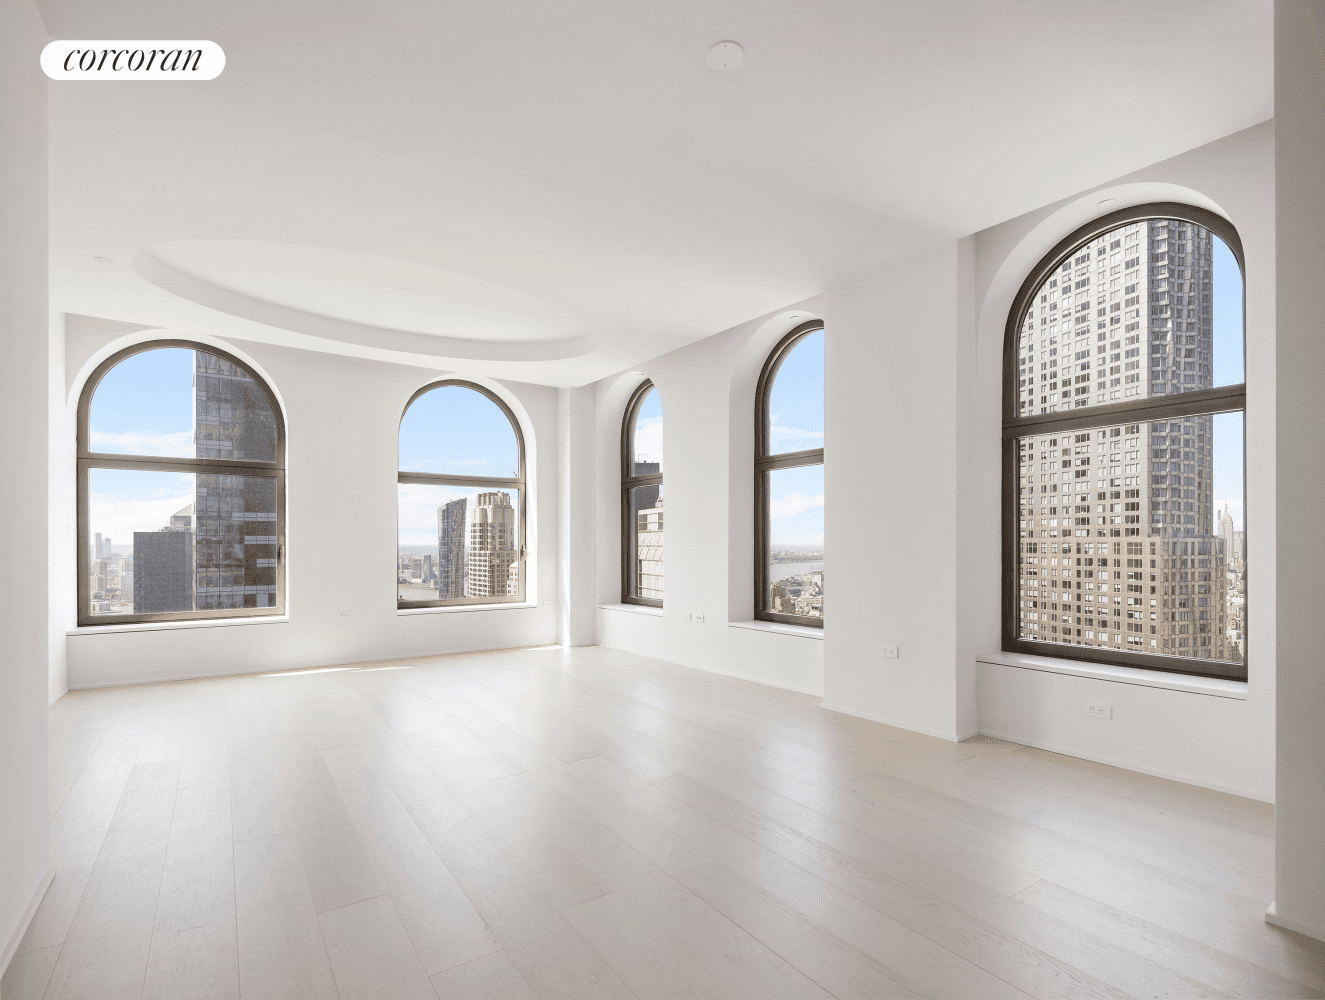 Welcome to residence 55D at 130 William Street, a stunning corner three bedroom, three bathroom apartment in Lower Manhattan.